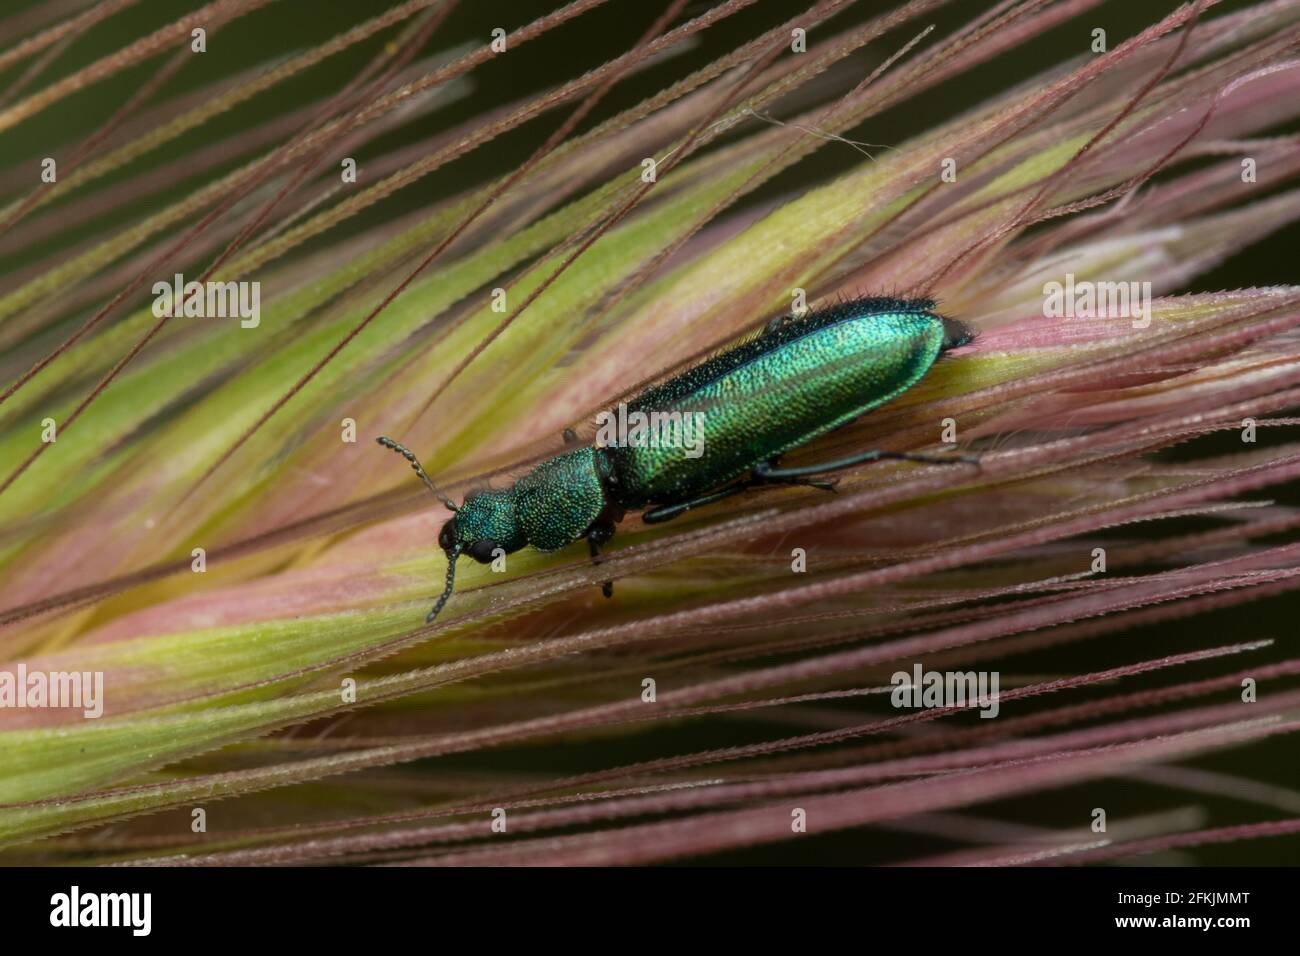 A Spanish fly going down green wheat flower Stock Photo